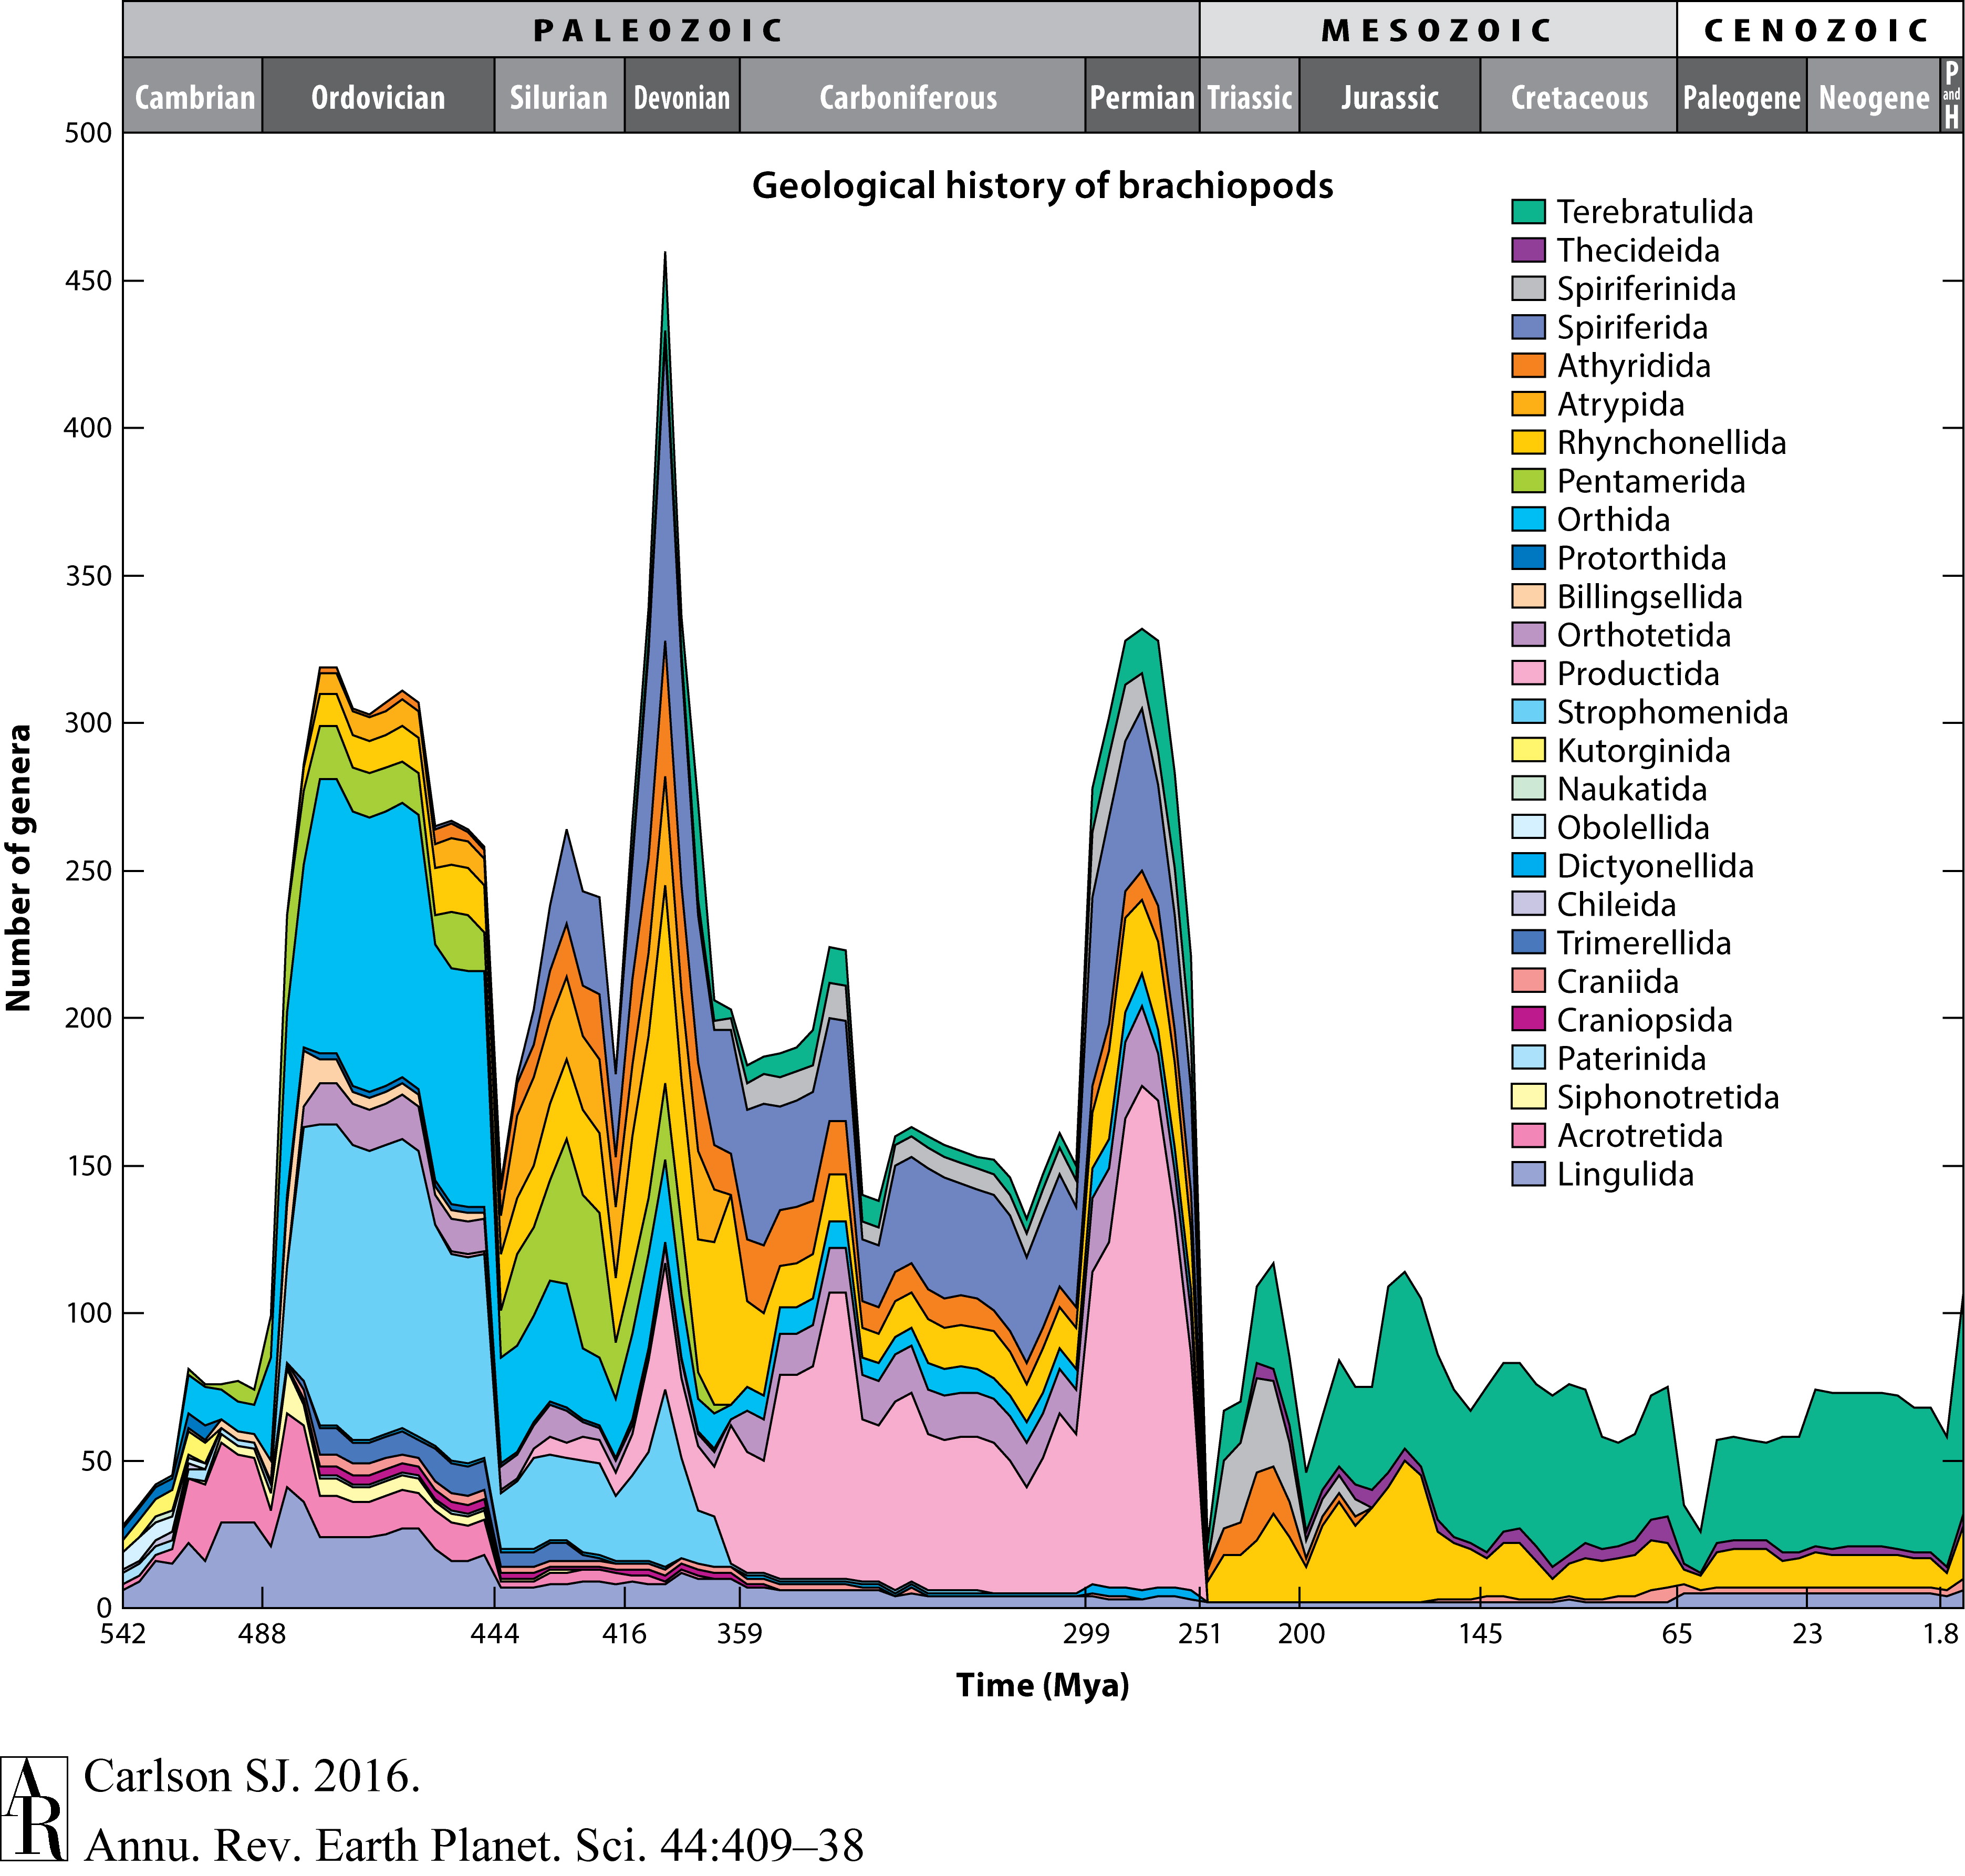 The rise and fall of brachiopod genera diversity over time from the Cambrian to recent.